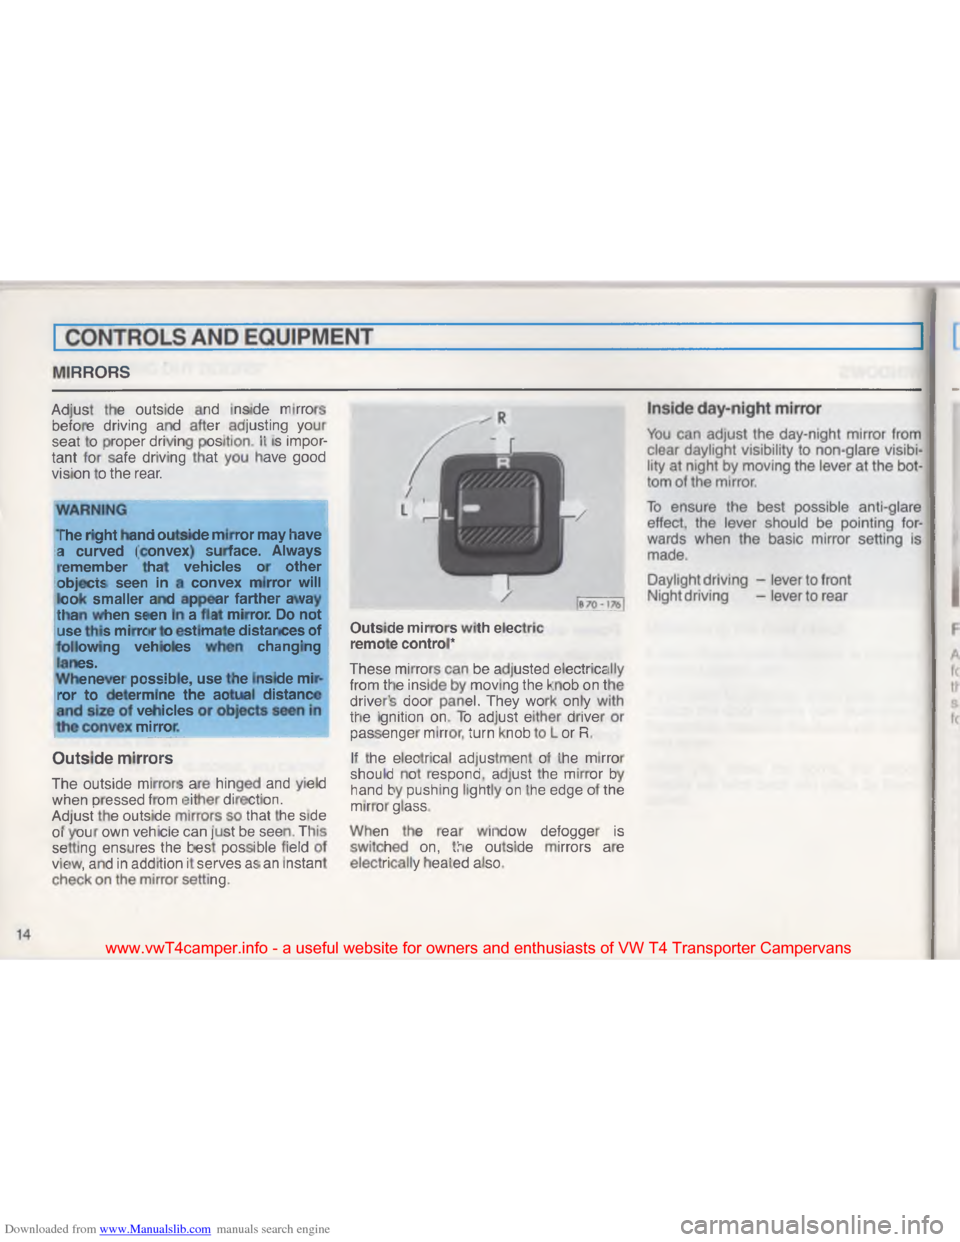 VOLKSWAGEN TRANSPORTER 1993 T4 / 4.G User Guide Downloaded from www.Manualslib.com manuals search engine \032
\036\001
\030
"#
\003
\004 /
* \001#
S
\002 \001
\005
;
;
H \001
! \036
#
#
\023
[
4 \020o
\030
\002
\021 \017
\b 0
* #
$
/
\030
+
2
\017
